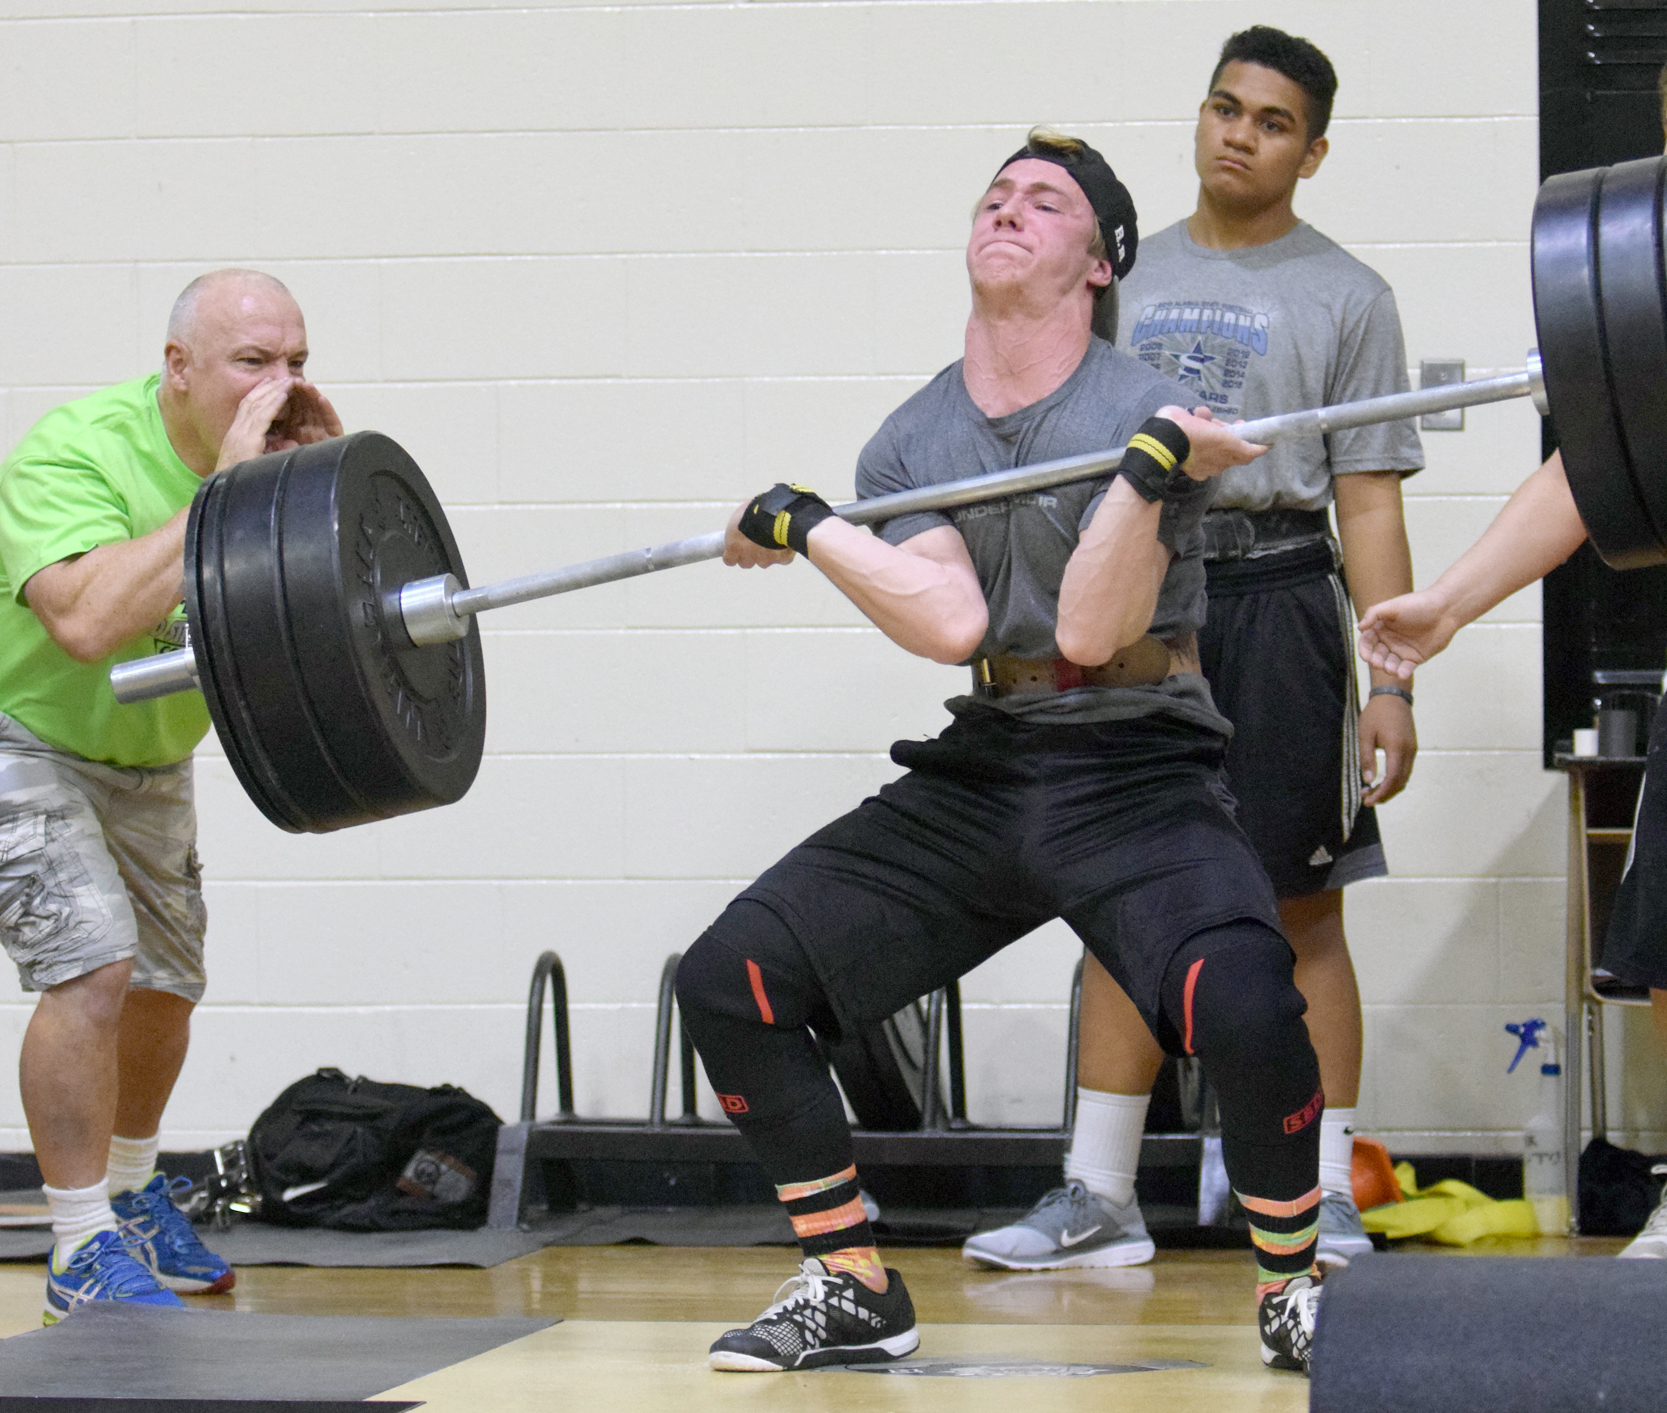 Rykker Riddall, then a Kenai sophomore, sets the record in the Freshmen/Sophomore Clean in March 2016 in the Speed and Strength Training competition. At left, yelling encouragement, is Riddall’s father, Ted Riddall. Ted Riddall will take over as Kenai Central’s football coach next season. (Photo by Jeff Helminiak/Peninsula Clarion)